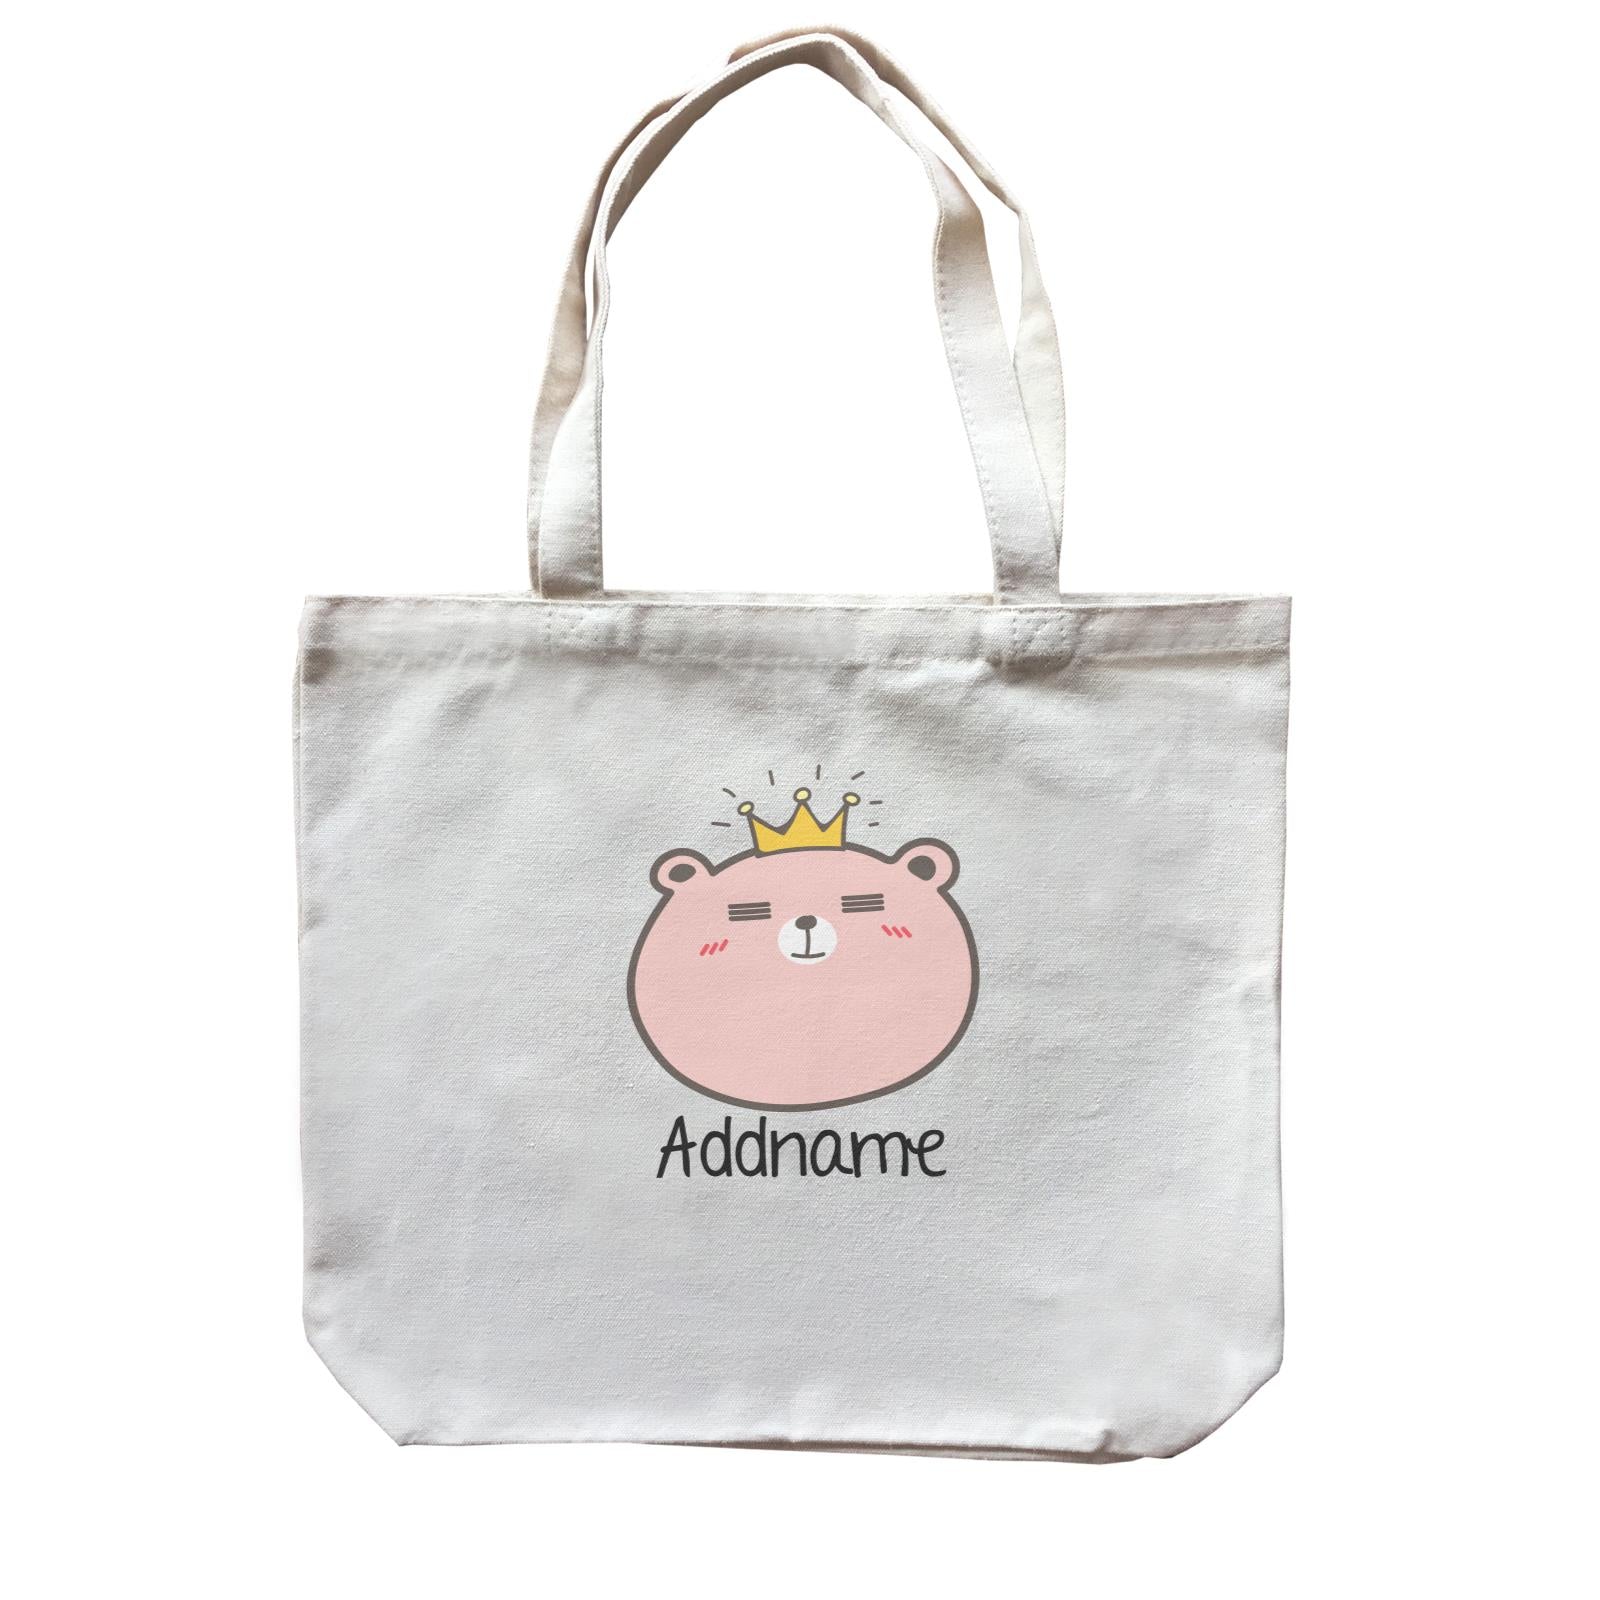 Cute Animals And Friends Series Cute Pink Bear With Crown Addname Canvas Bag